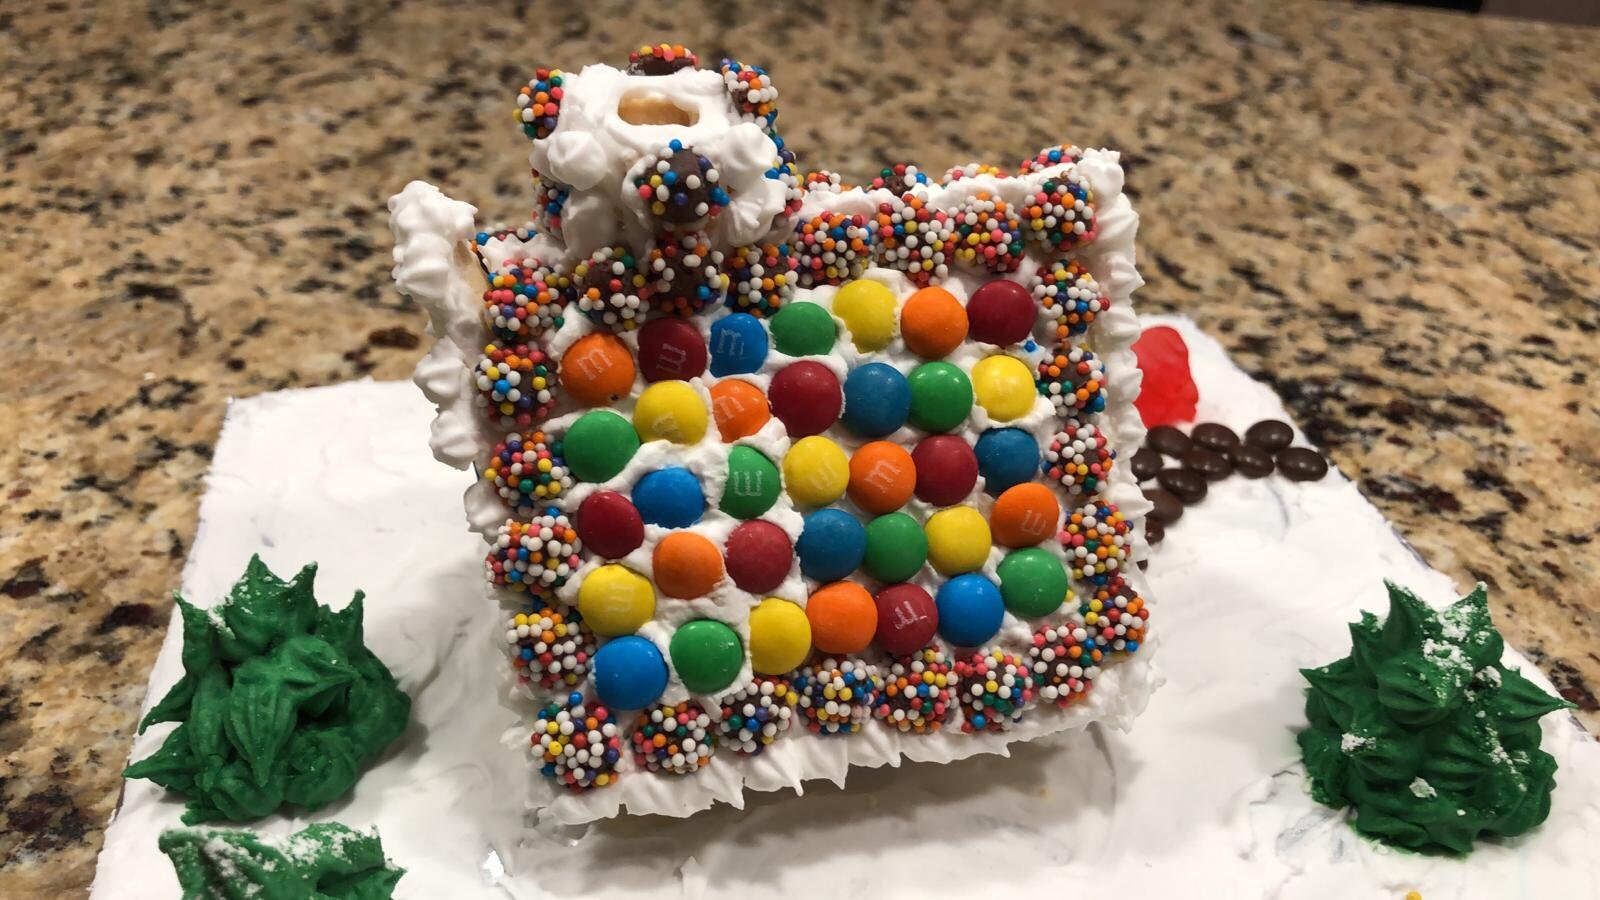 Christmas Gingerbread House Pattern - Small (5.8" x 3.4" x 4.5"). Gingerbread House Patterns, Recipes, Tips & Tricks In One Complete Package